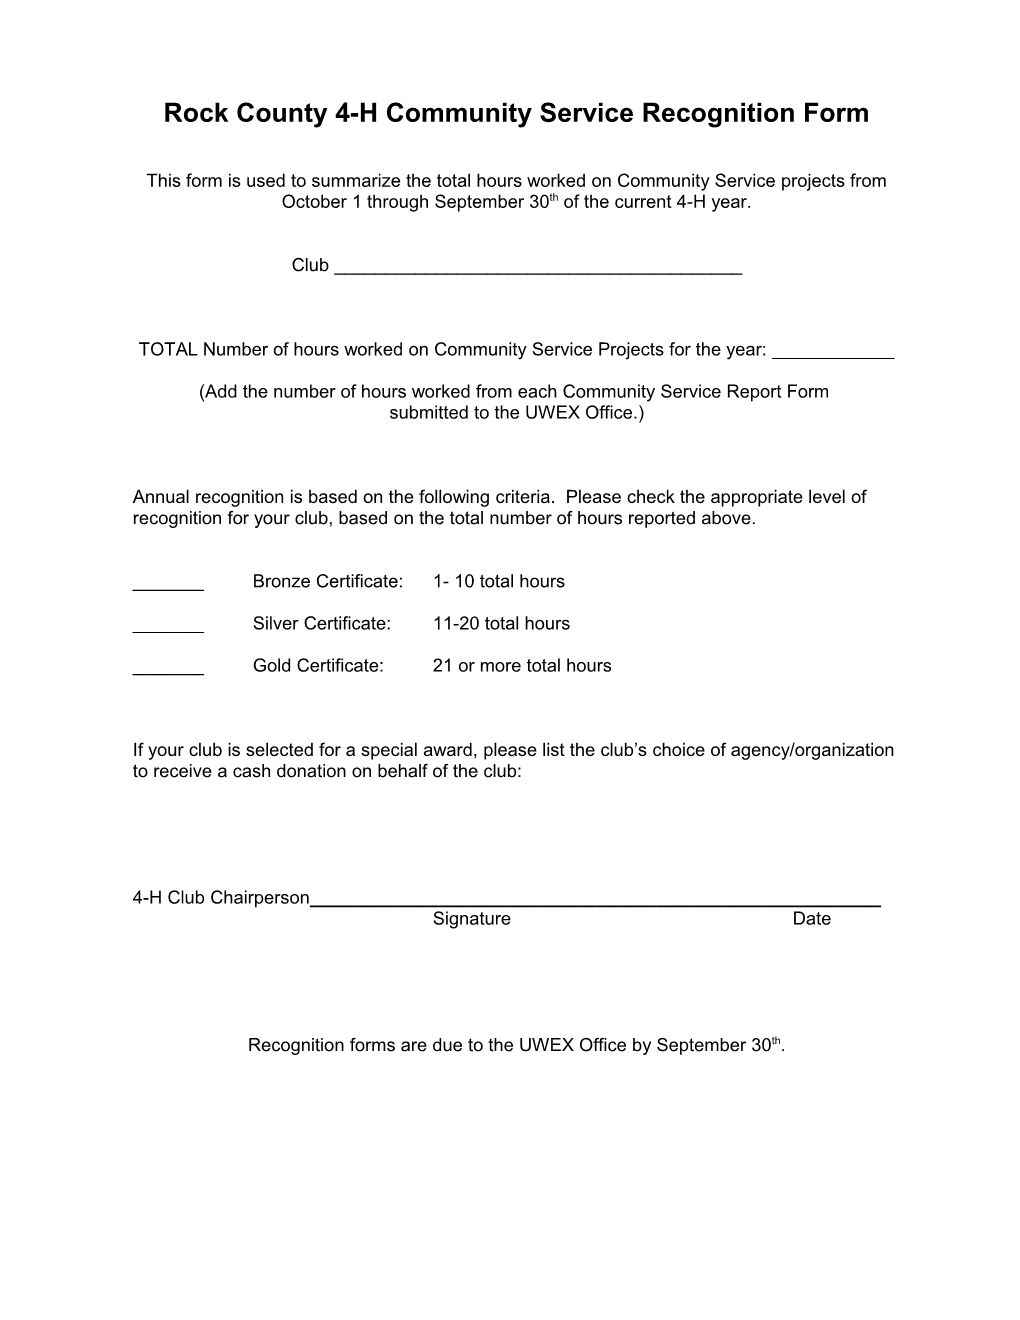 Rock County 4-H Community Service Recognition Form